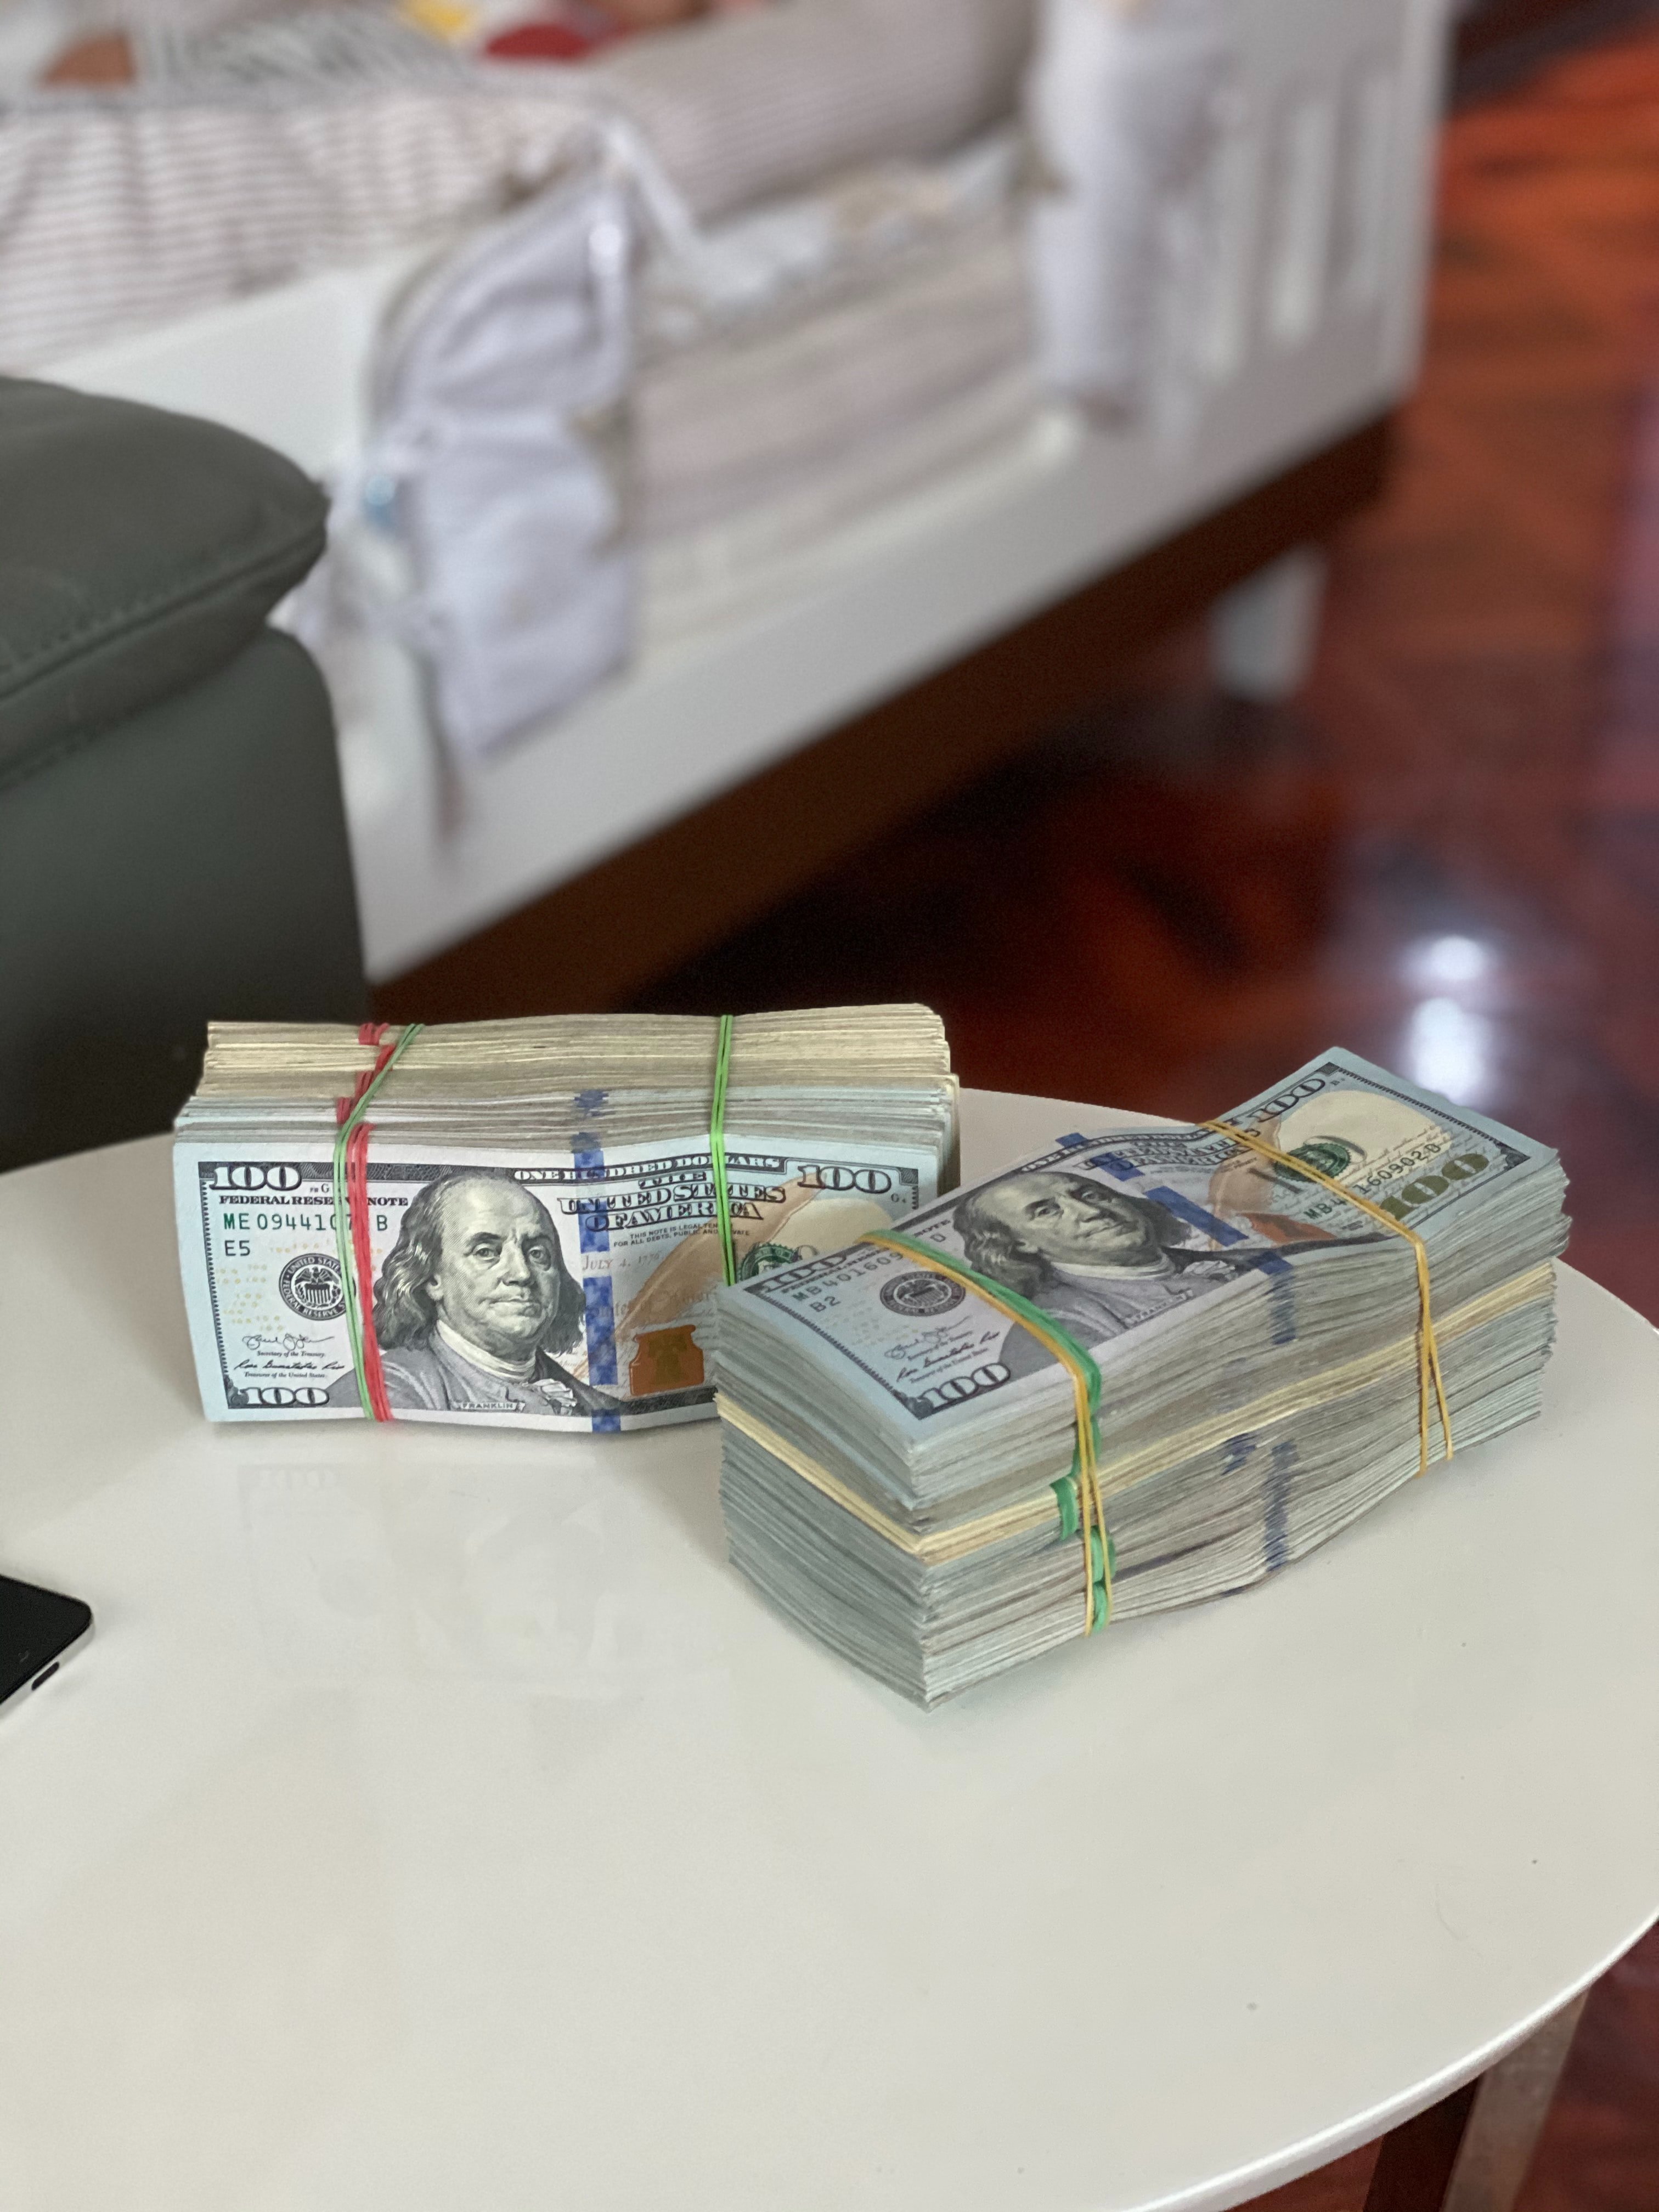 By the time Carla woke up in the morning, Harry was gone but on the couch was a ragged backpack filled with $100,000 and a note | Source: Pexels